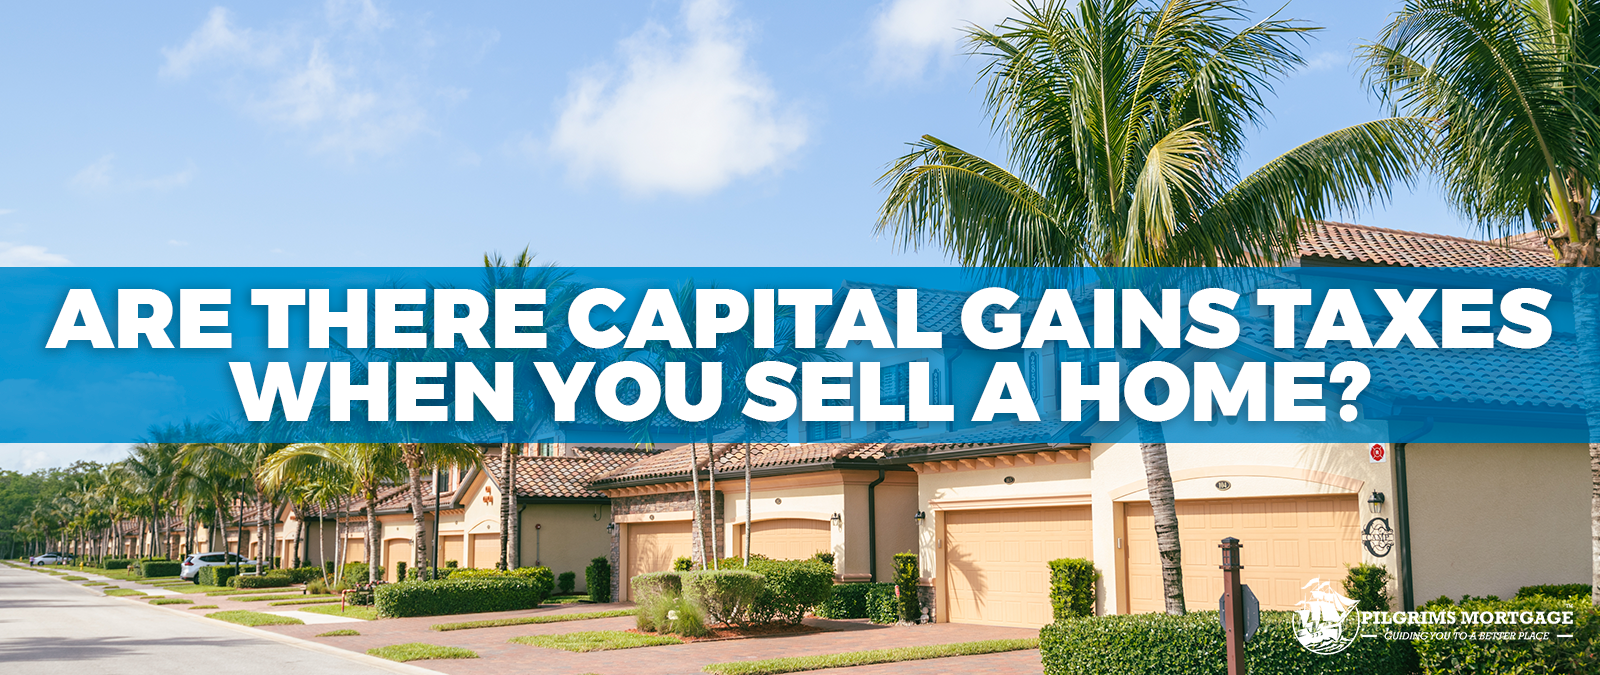 Are There Capital Gains Taxes When you Sell a Home?